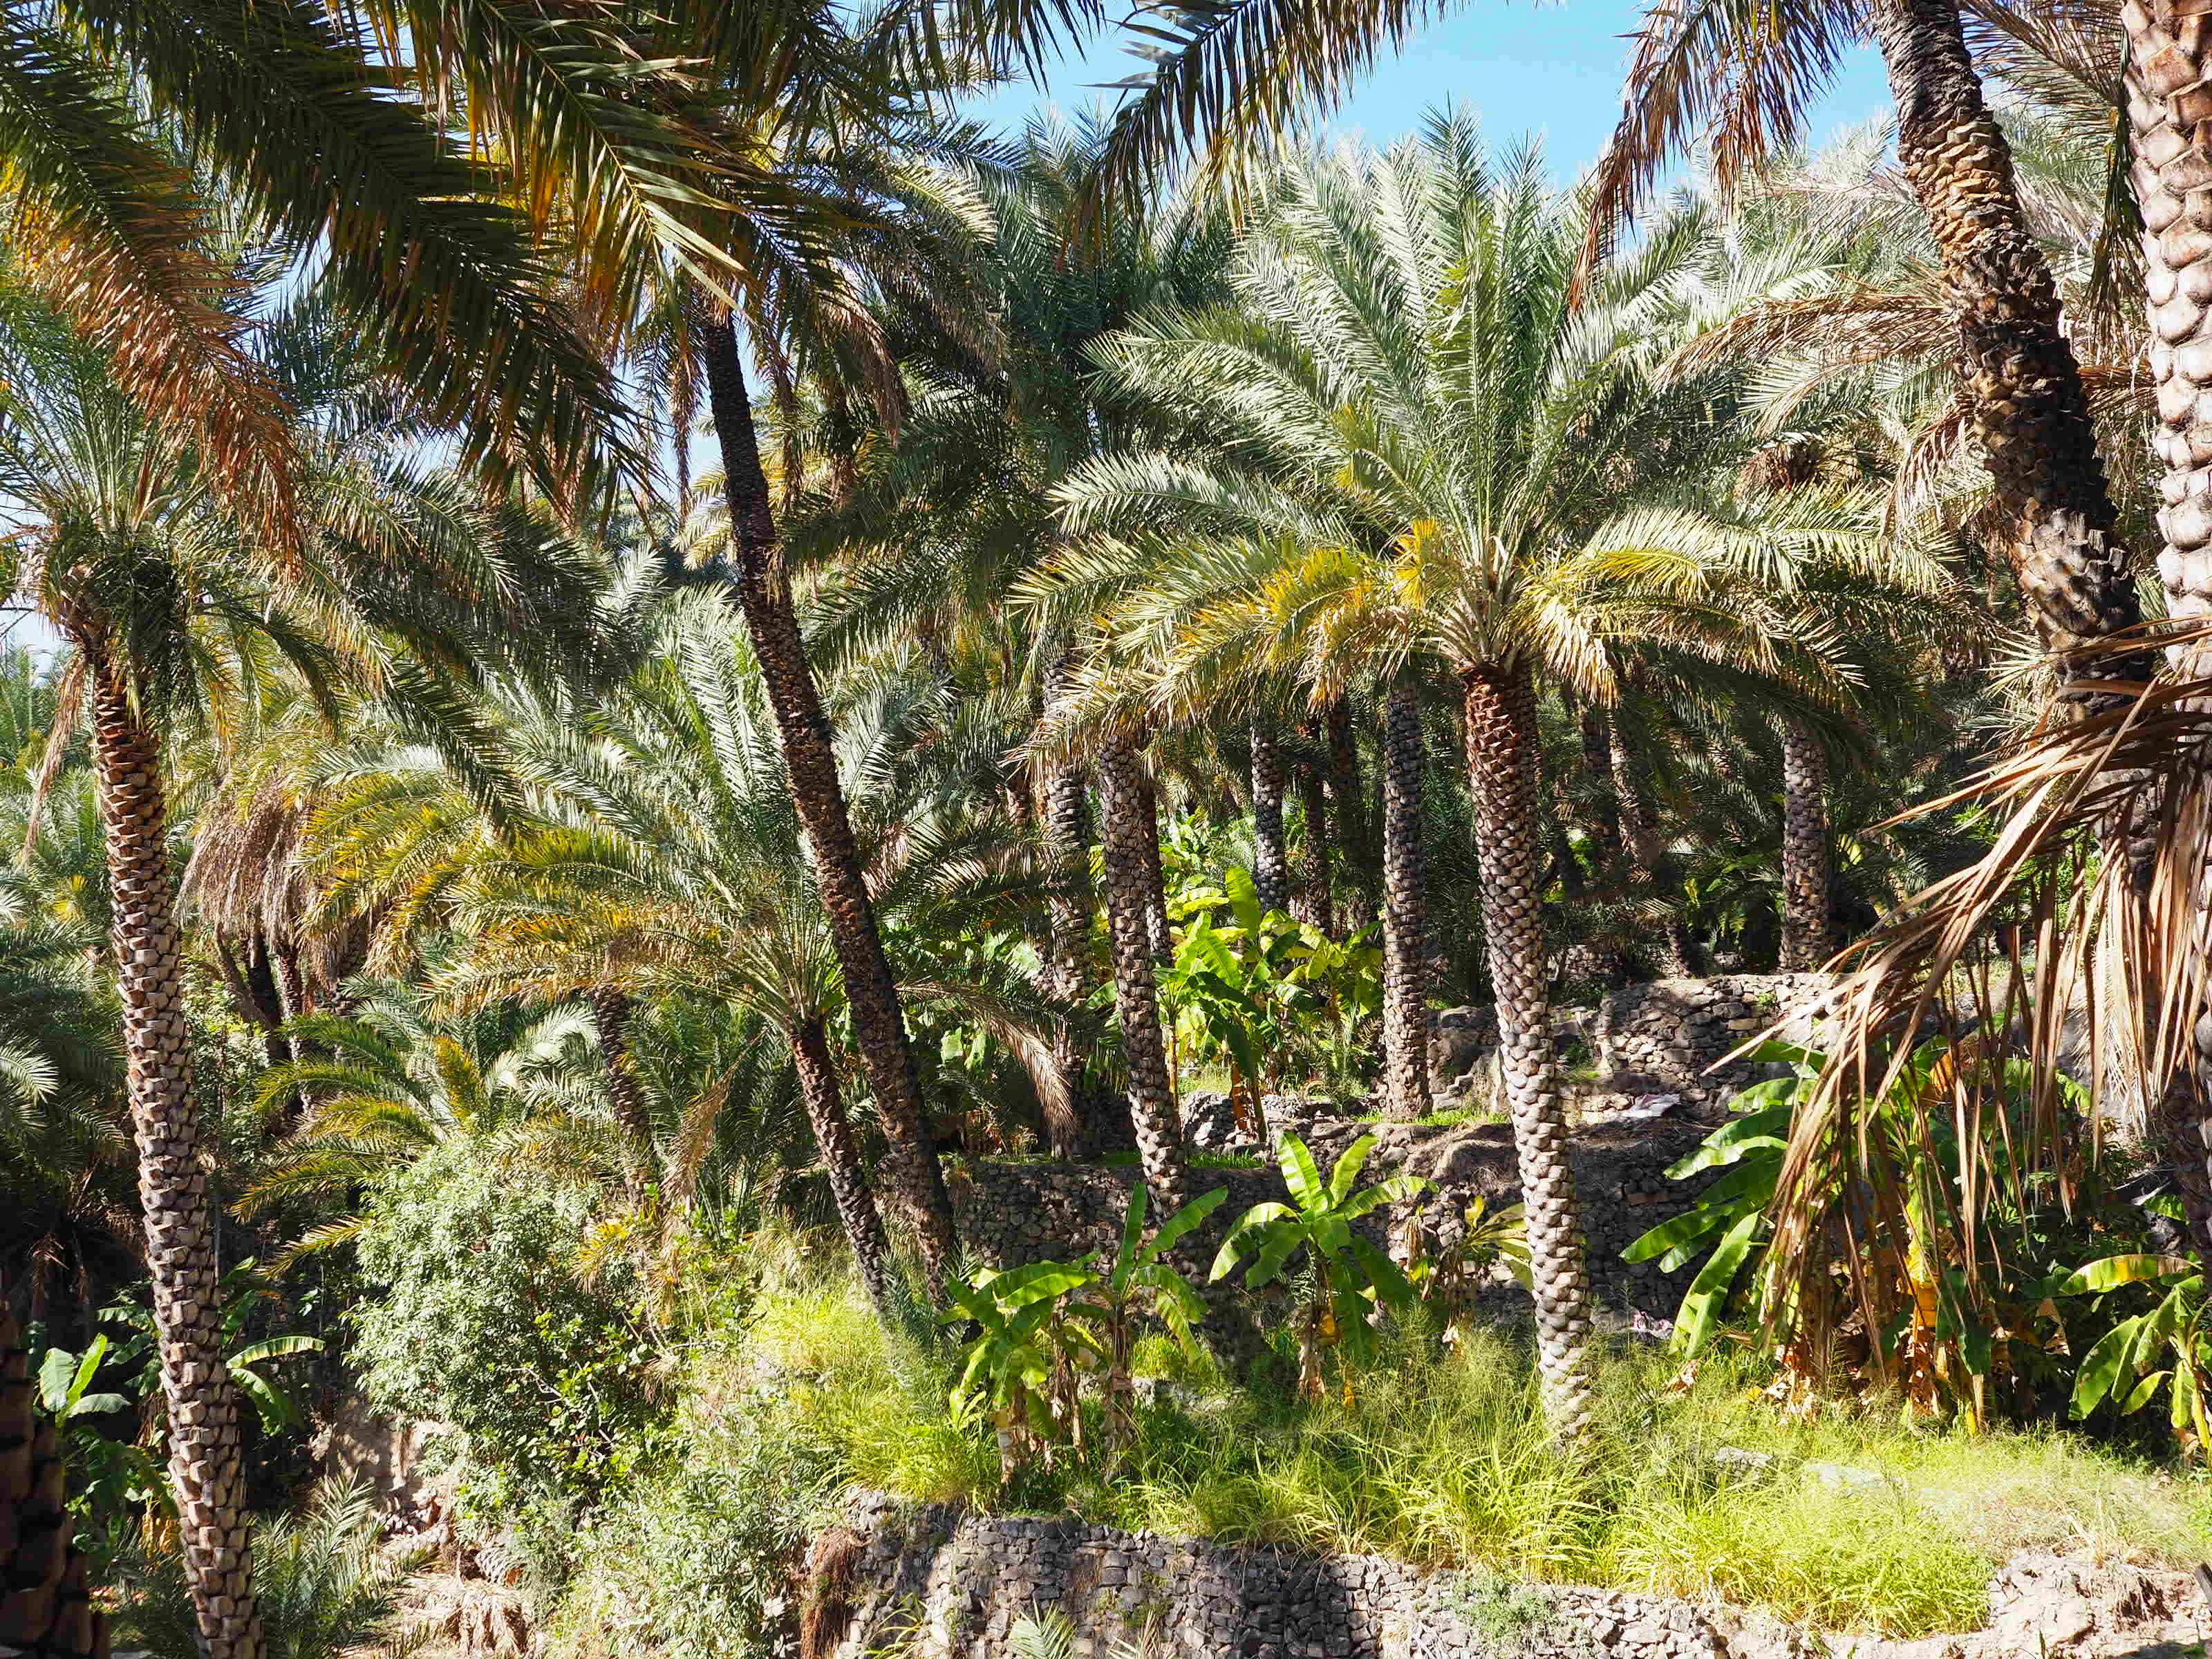 Palms in the Misfah oasis